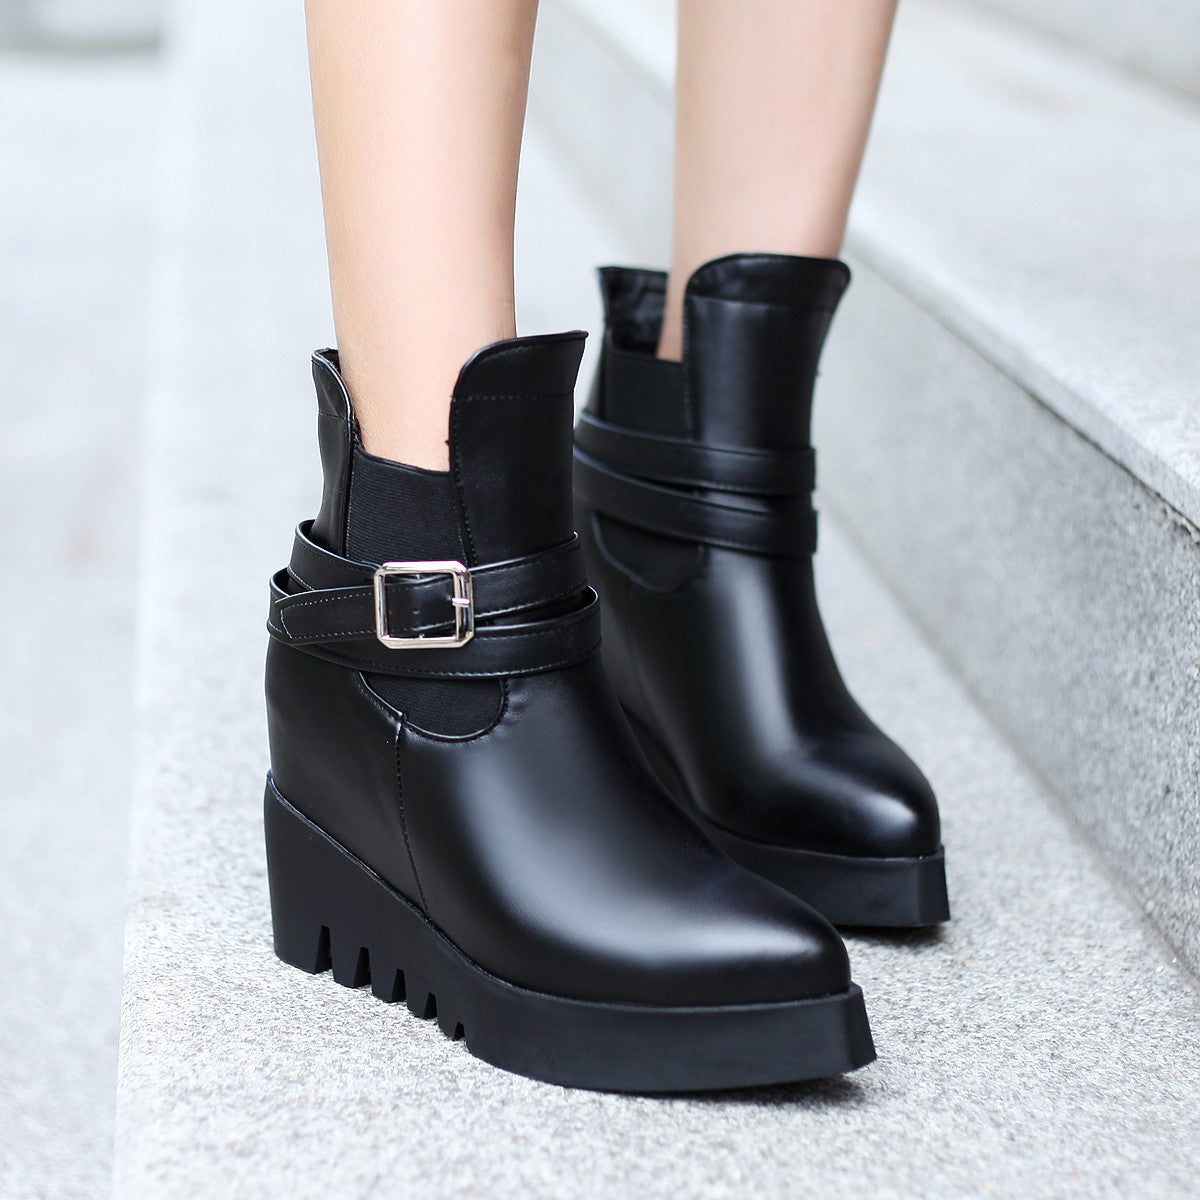 Black Buckle Ankle Boots Women Shoes Fall|Winter 11191501